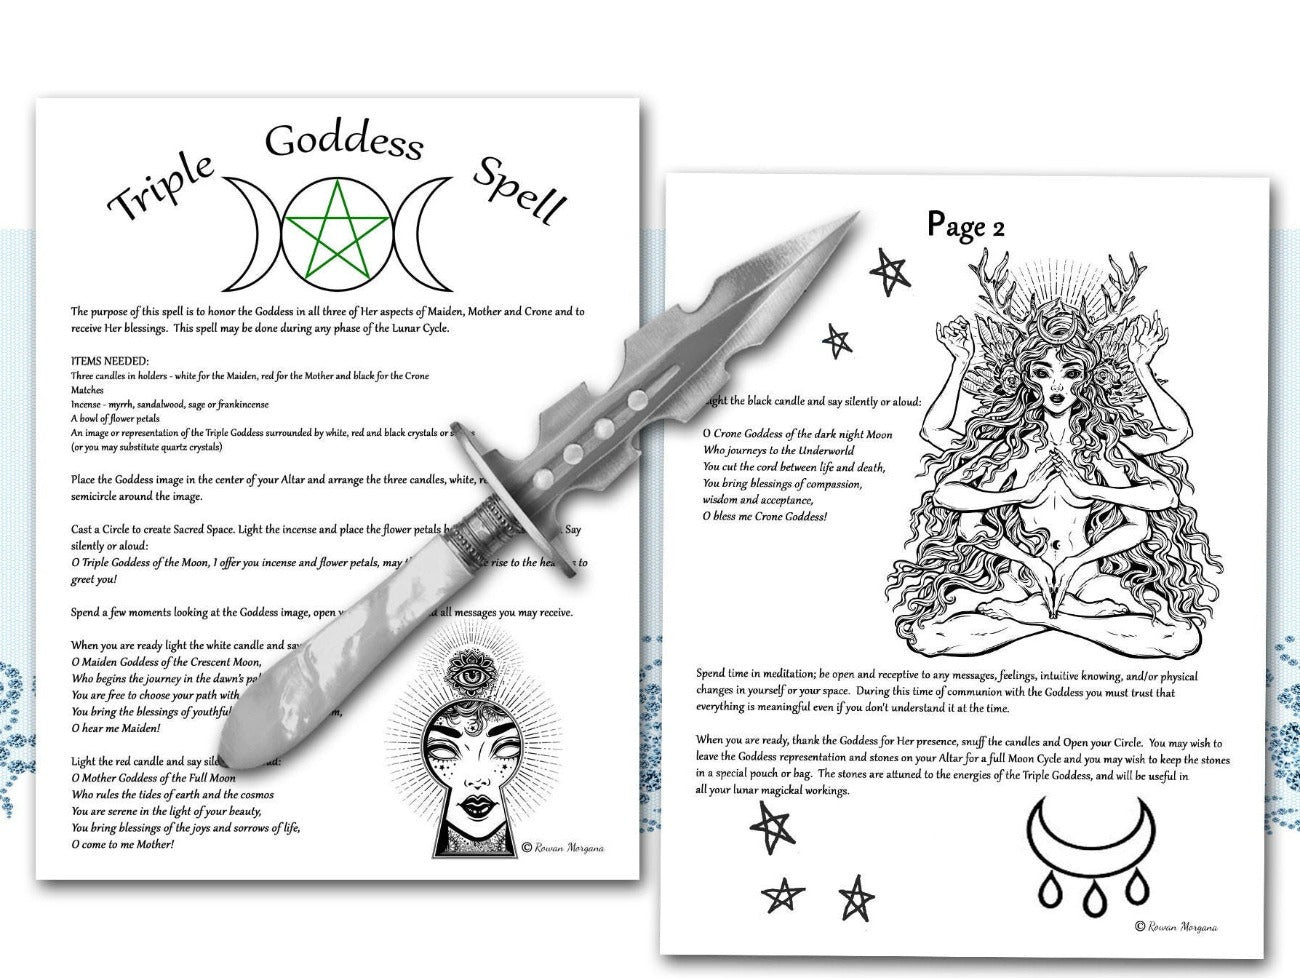 GODDESS BLESSING SPELL 2 Pages, Witchcraft Triple Goddess Spell, Wicca Goddess Magic, Maiden Mother Crone Goddess, Cast a Witch Moon Spell - Morgana Magick Spell